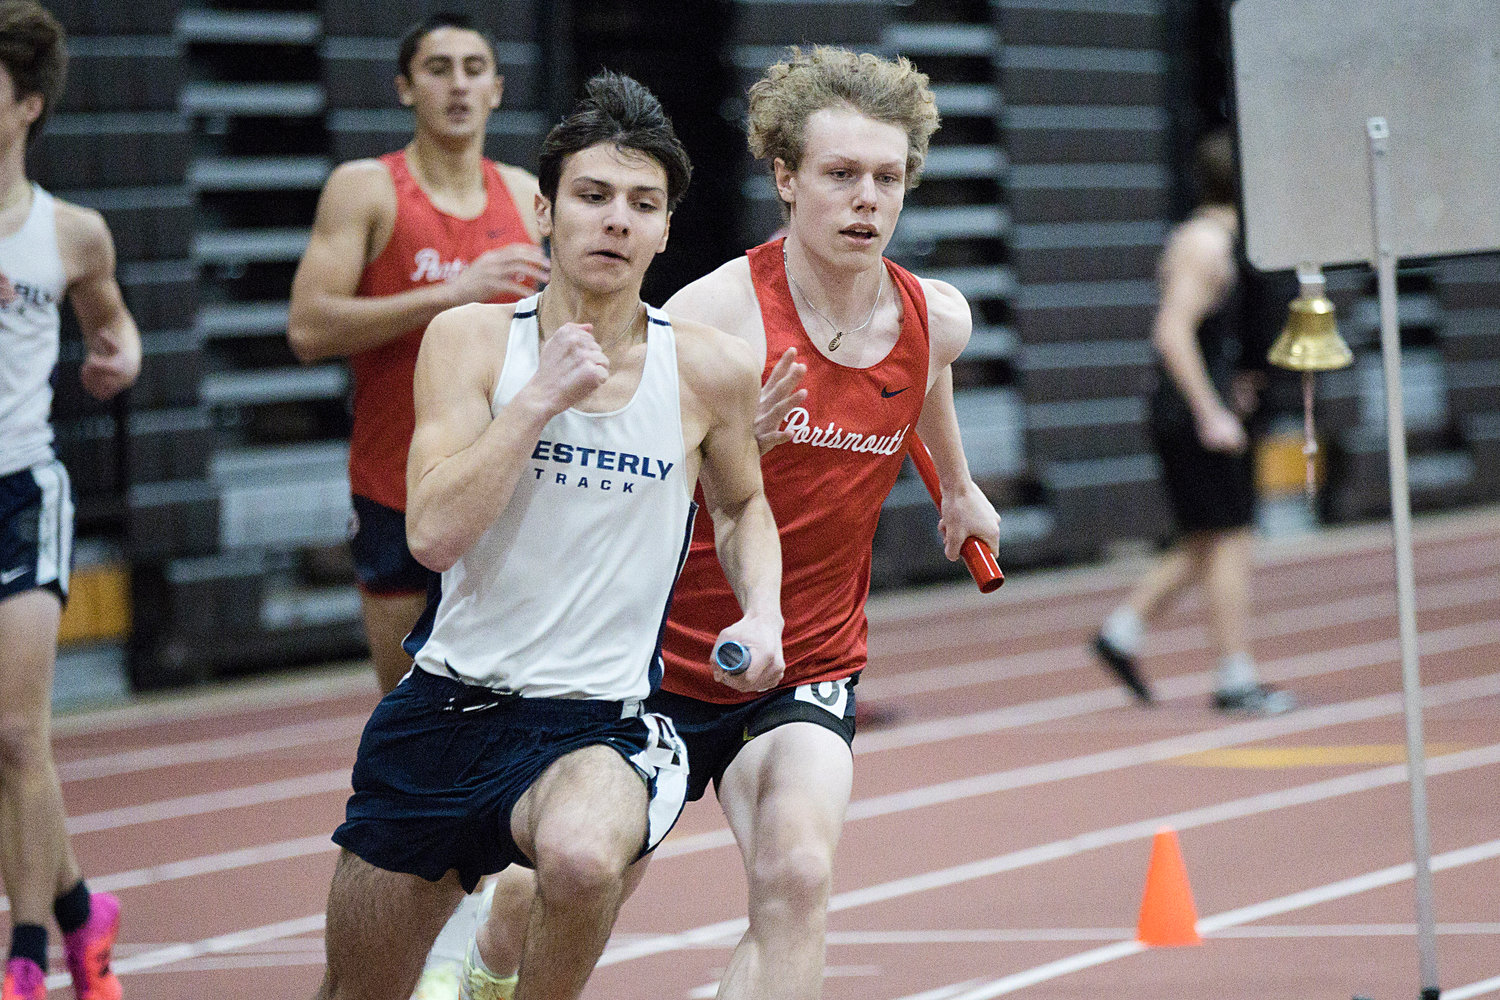 Lukas Huffman races past a Westerly opponent while running the final leg of the 4x200 in which Portsmouth finished first.